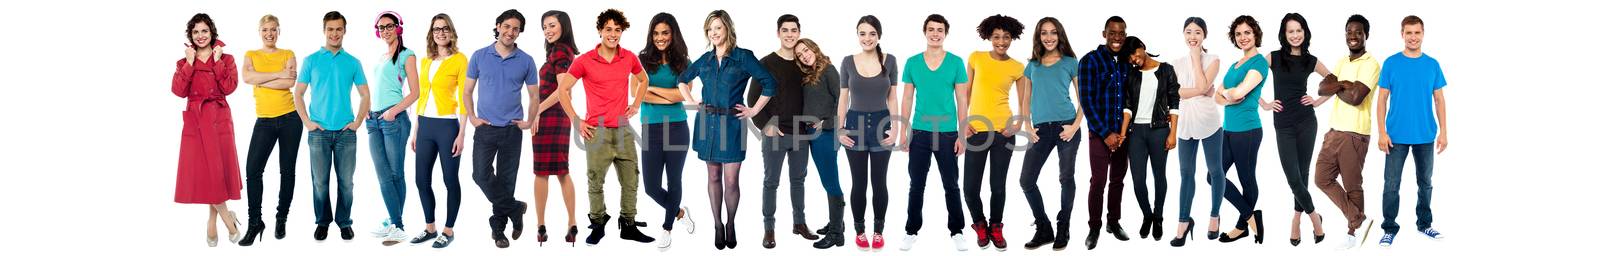 Collage of casual young cheerful people by stockyimages